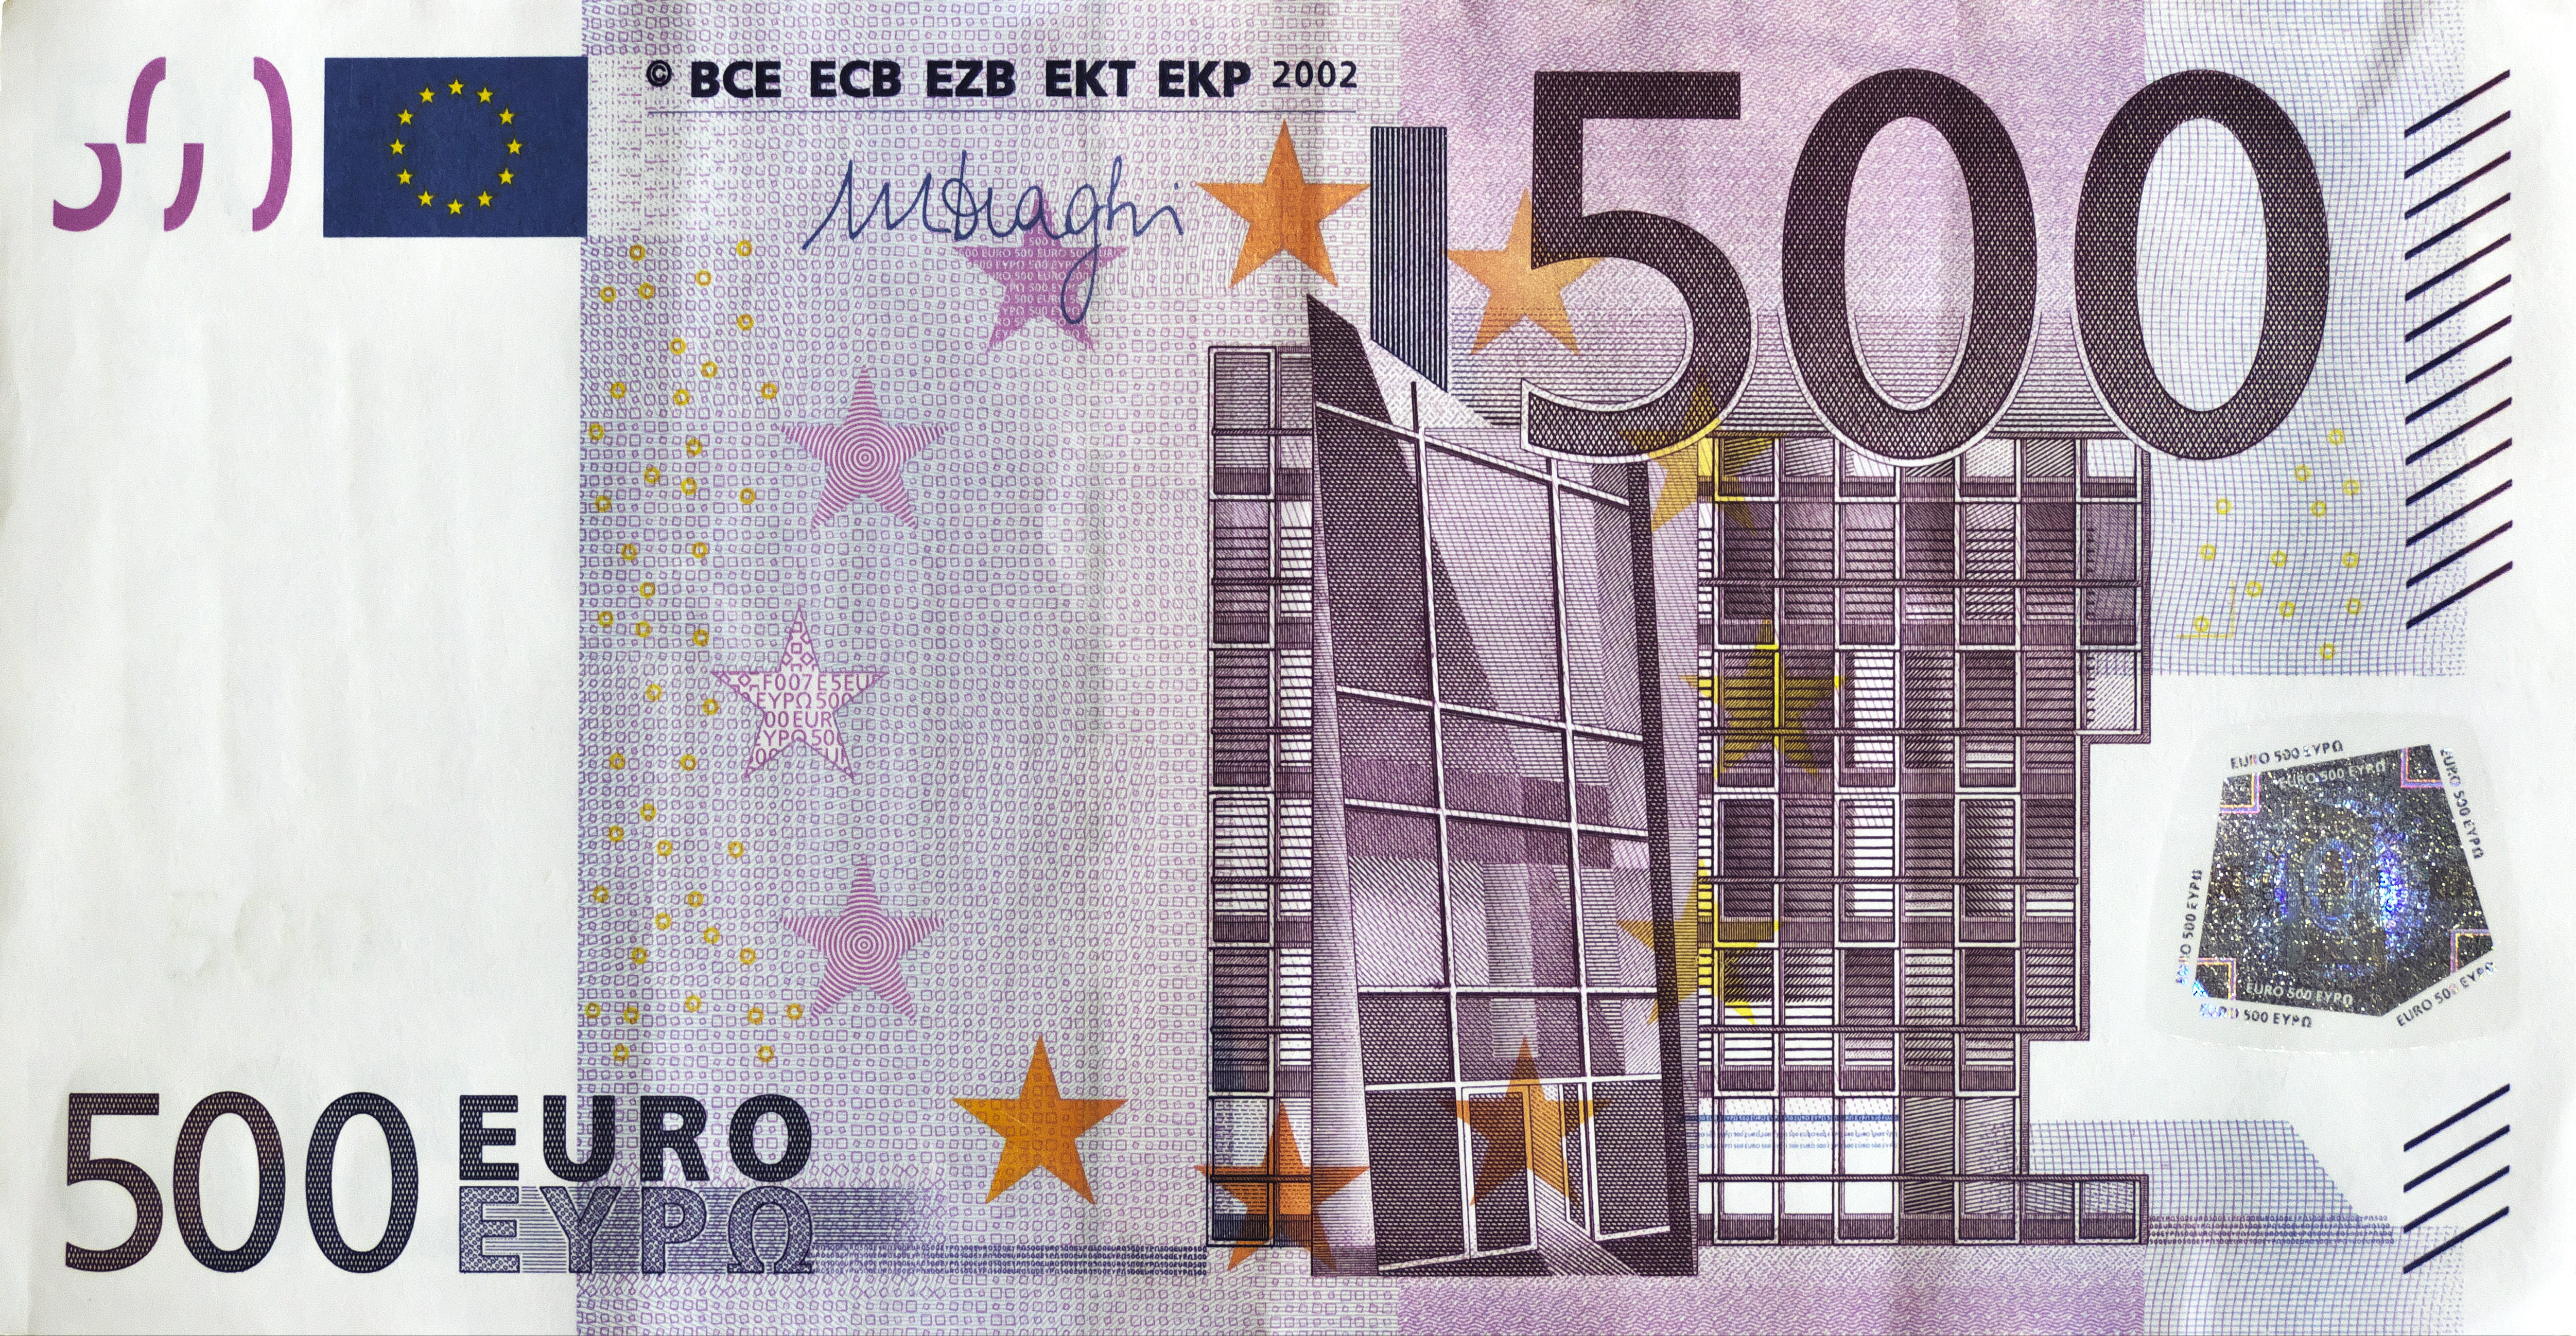 euro, dollar bill, 500 euro, currency, paper money, euro banknote